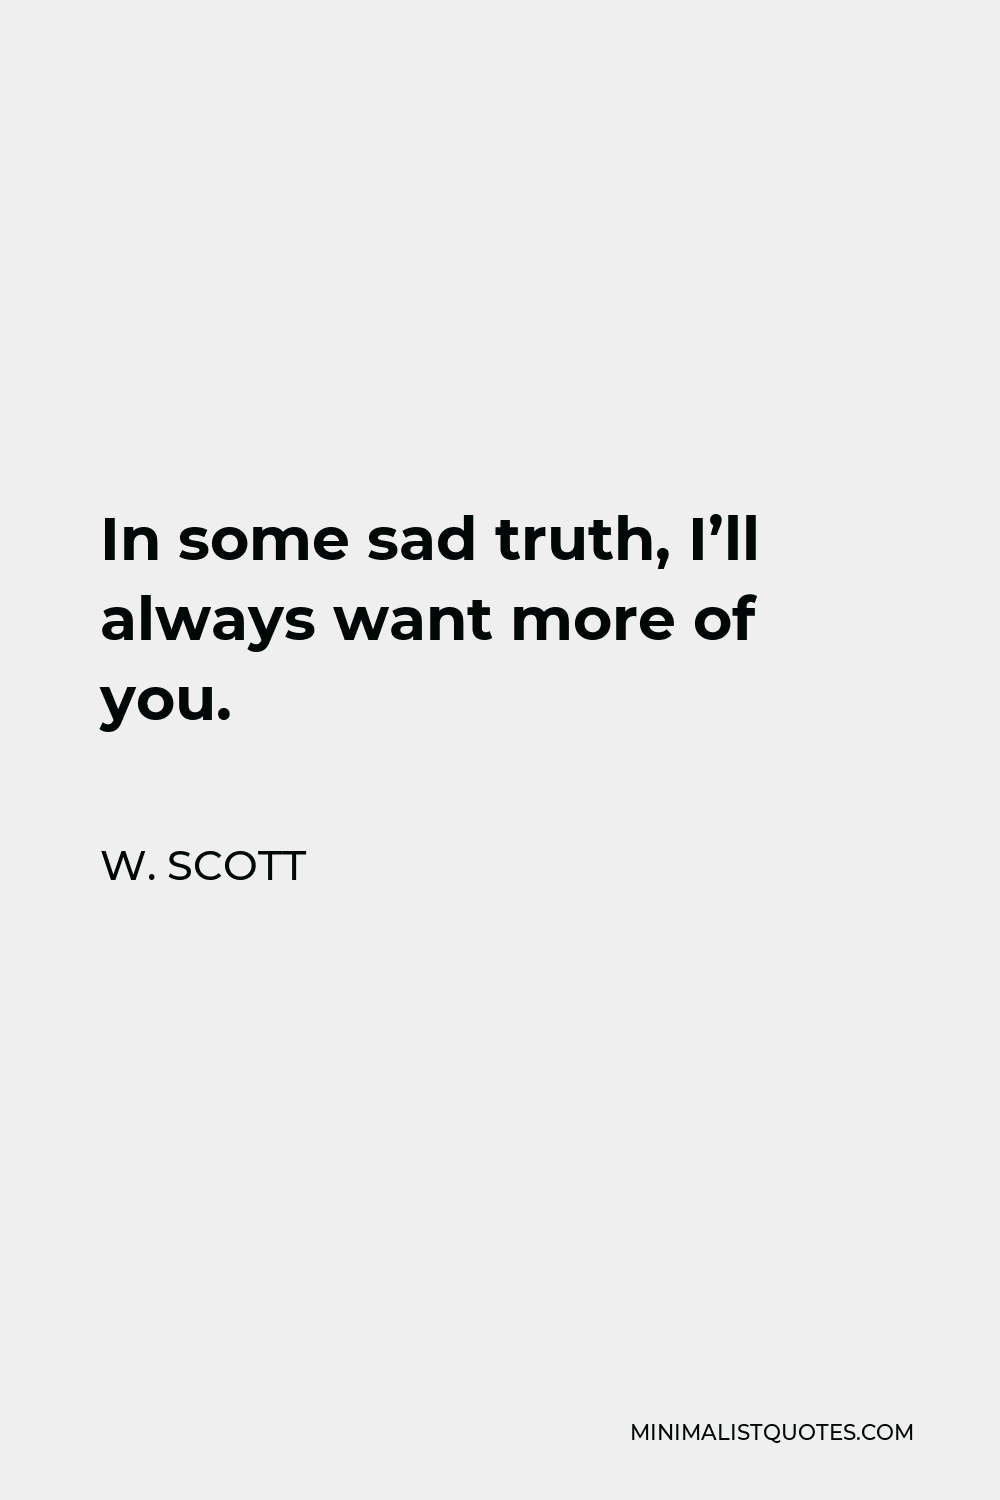 W. Scott Quote - In some sad truth, I’ll always want more of you.